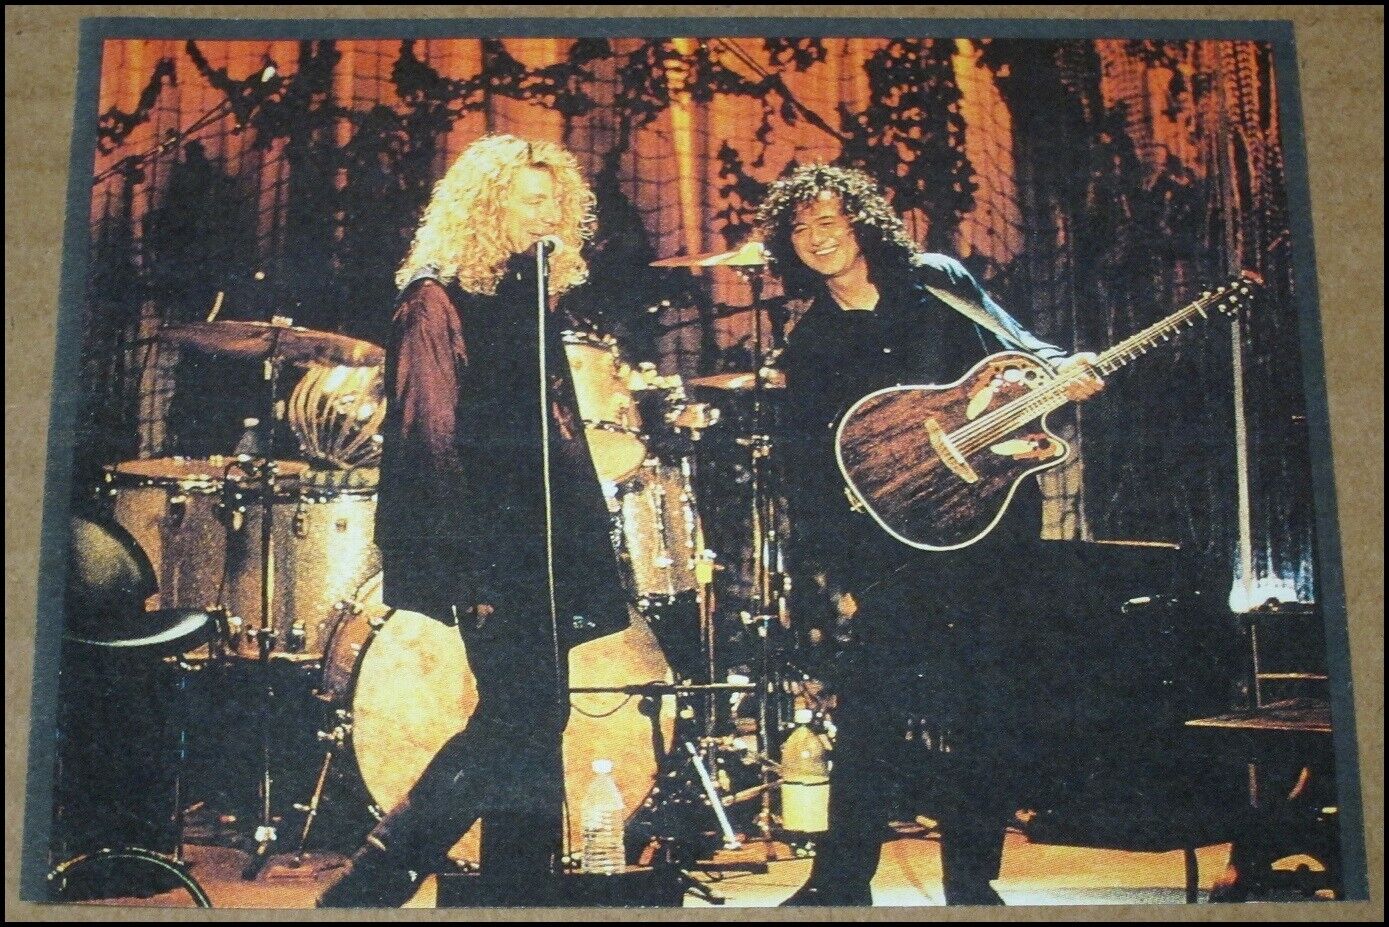 1994 Led Zeppelin Robert Plant Jimmy Page RS Magazine Photo Clipping 4.75\